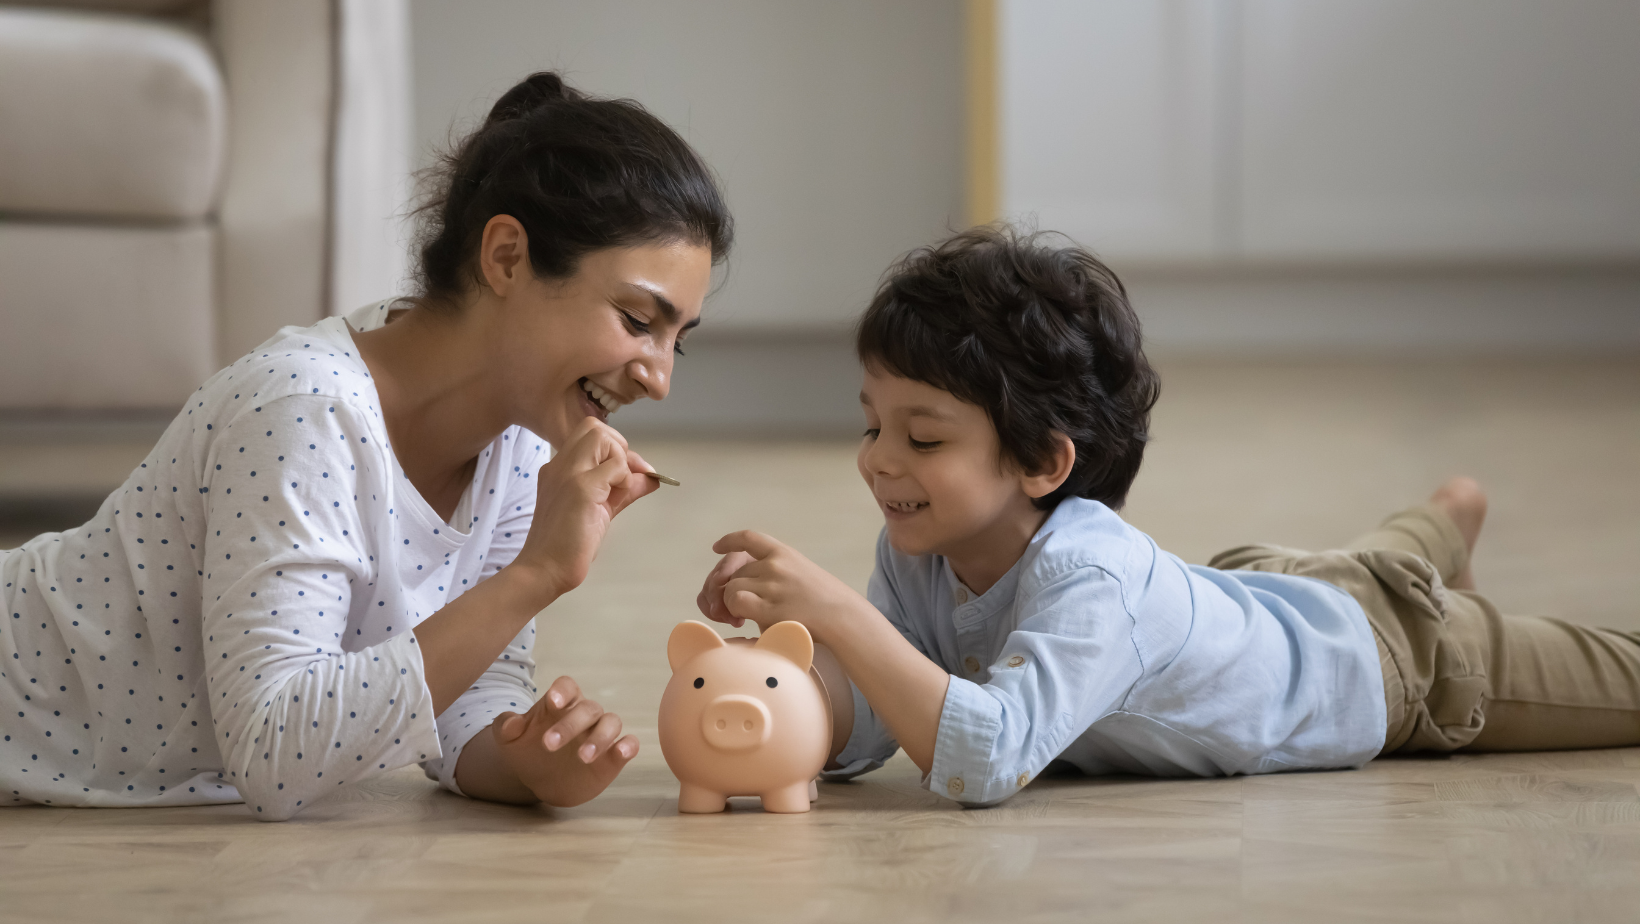 Mom and child putting money into a piggy bank